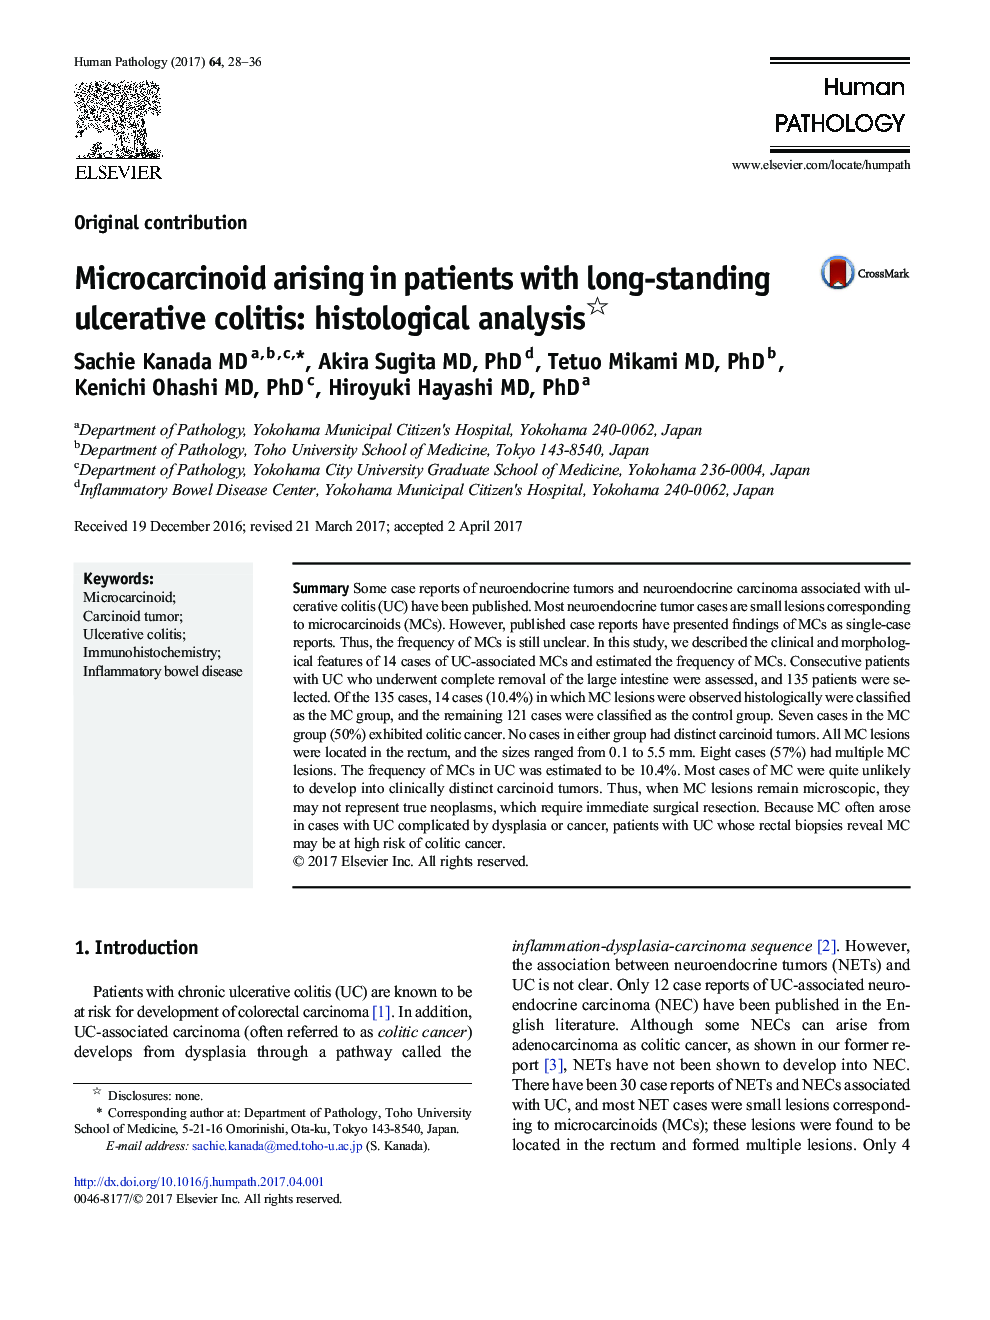 Original contributionMicrocarcinoid arising in patients with long-standing ulcerative colitis: histological analysis